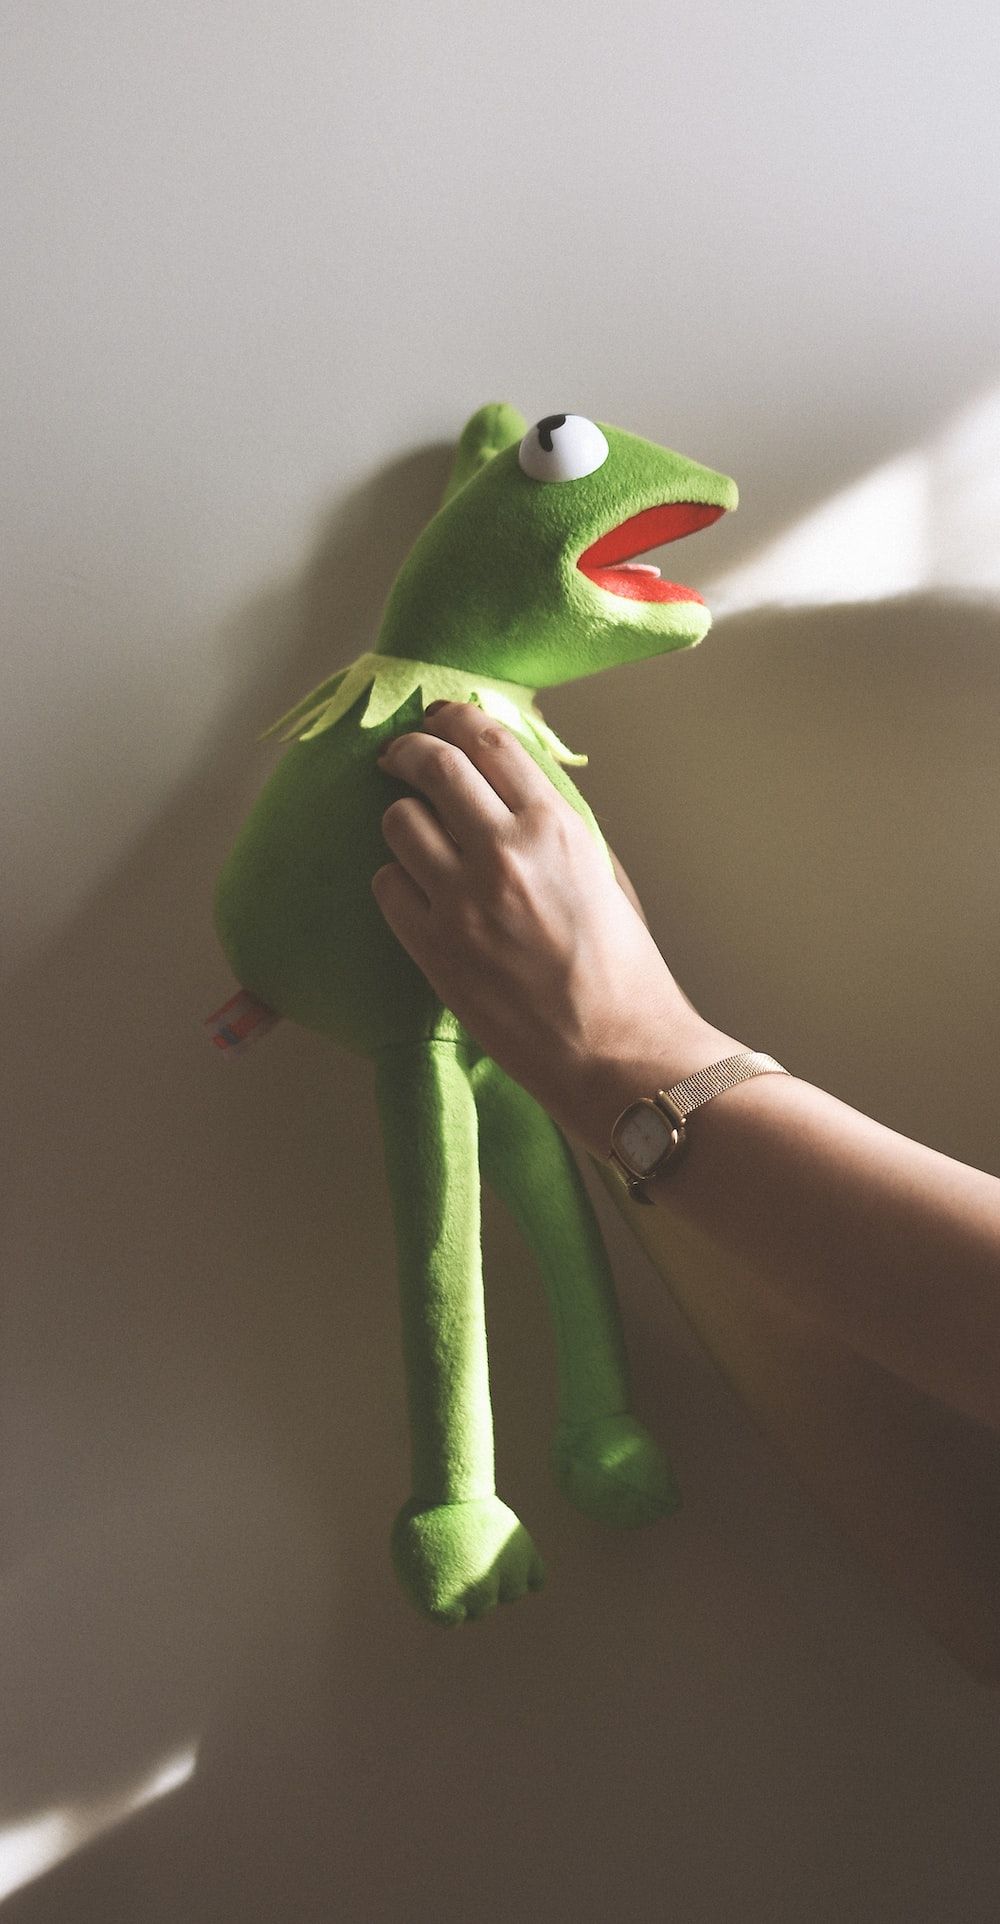 green frog plush toy on persons hand photo